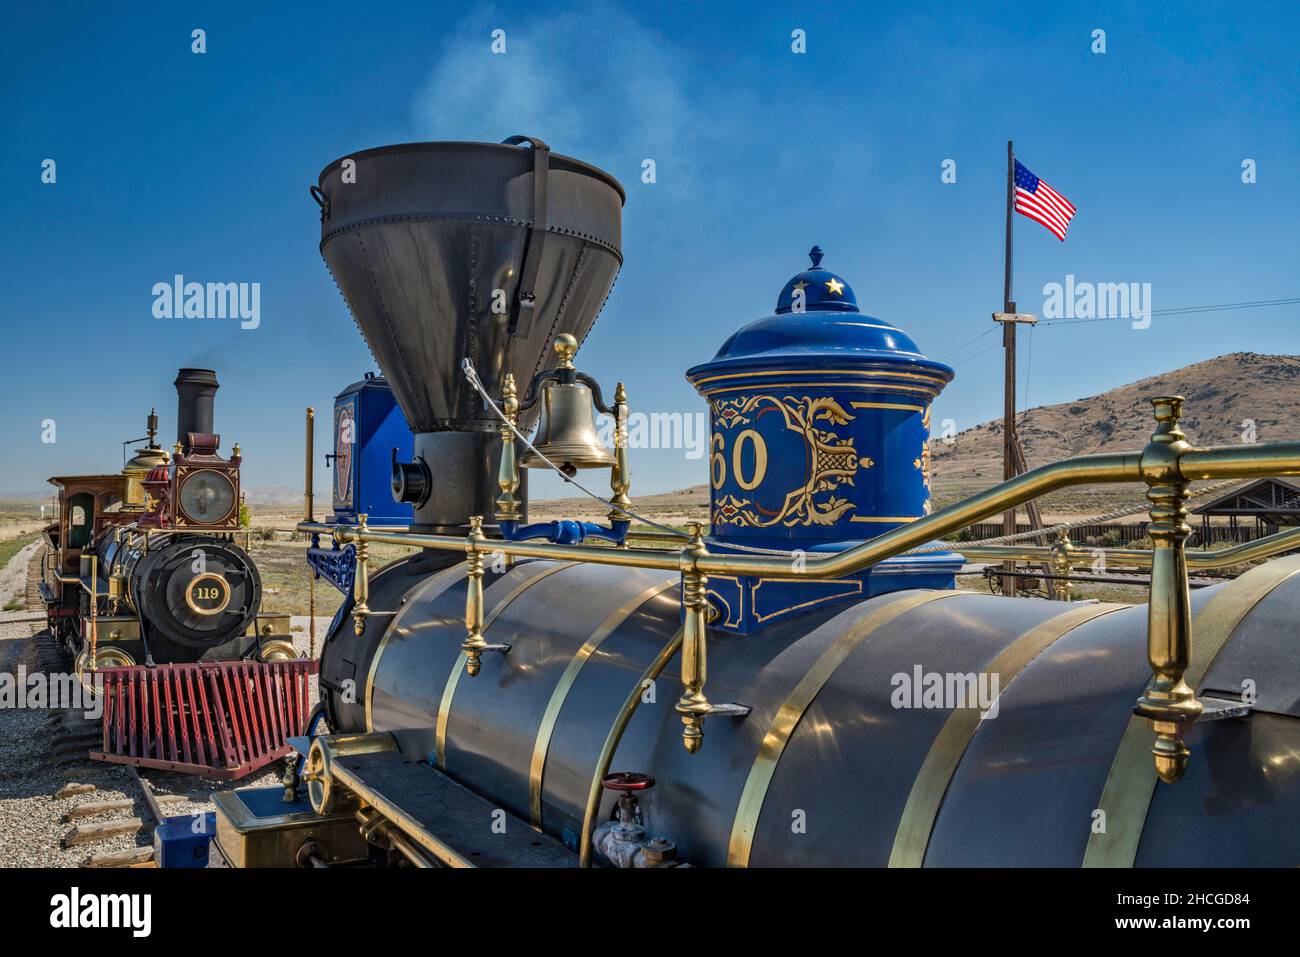 Steam dome, bell and smokestack on top of boiler, Jupiter steam engine locomotive replica at Last Spike Site at Promontory Summit, Golden Spike National Historical Park, Utah, USA Stock Photo